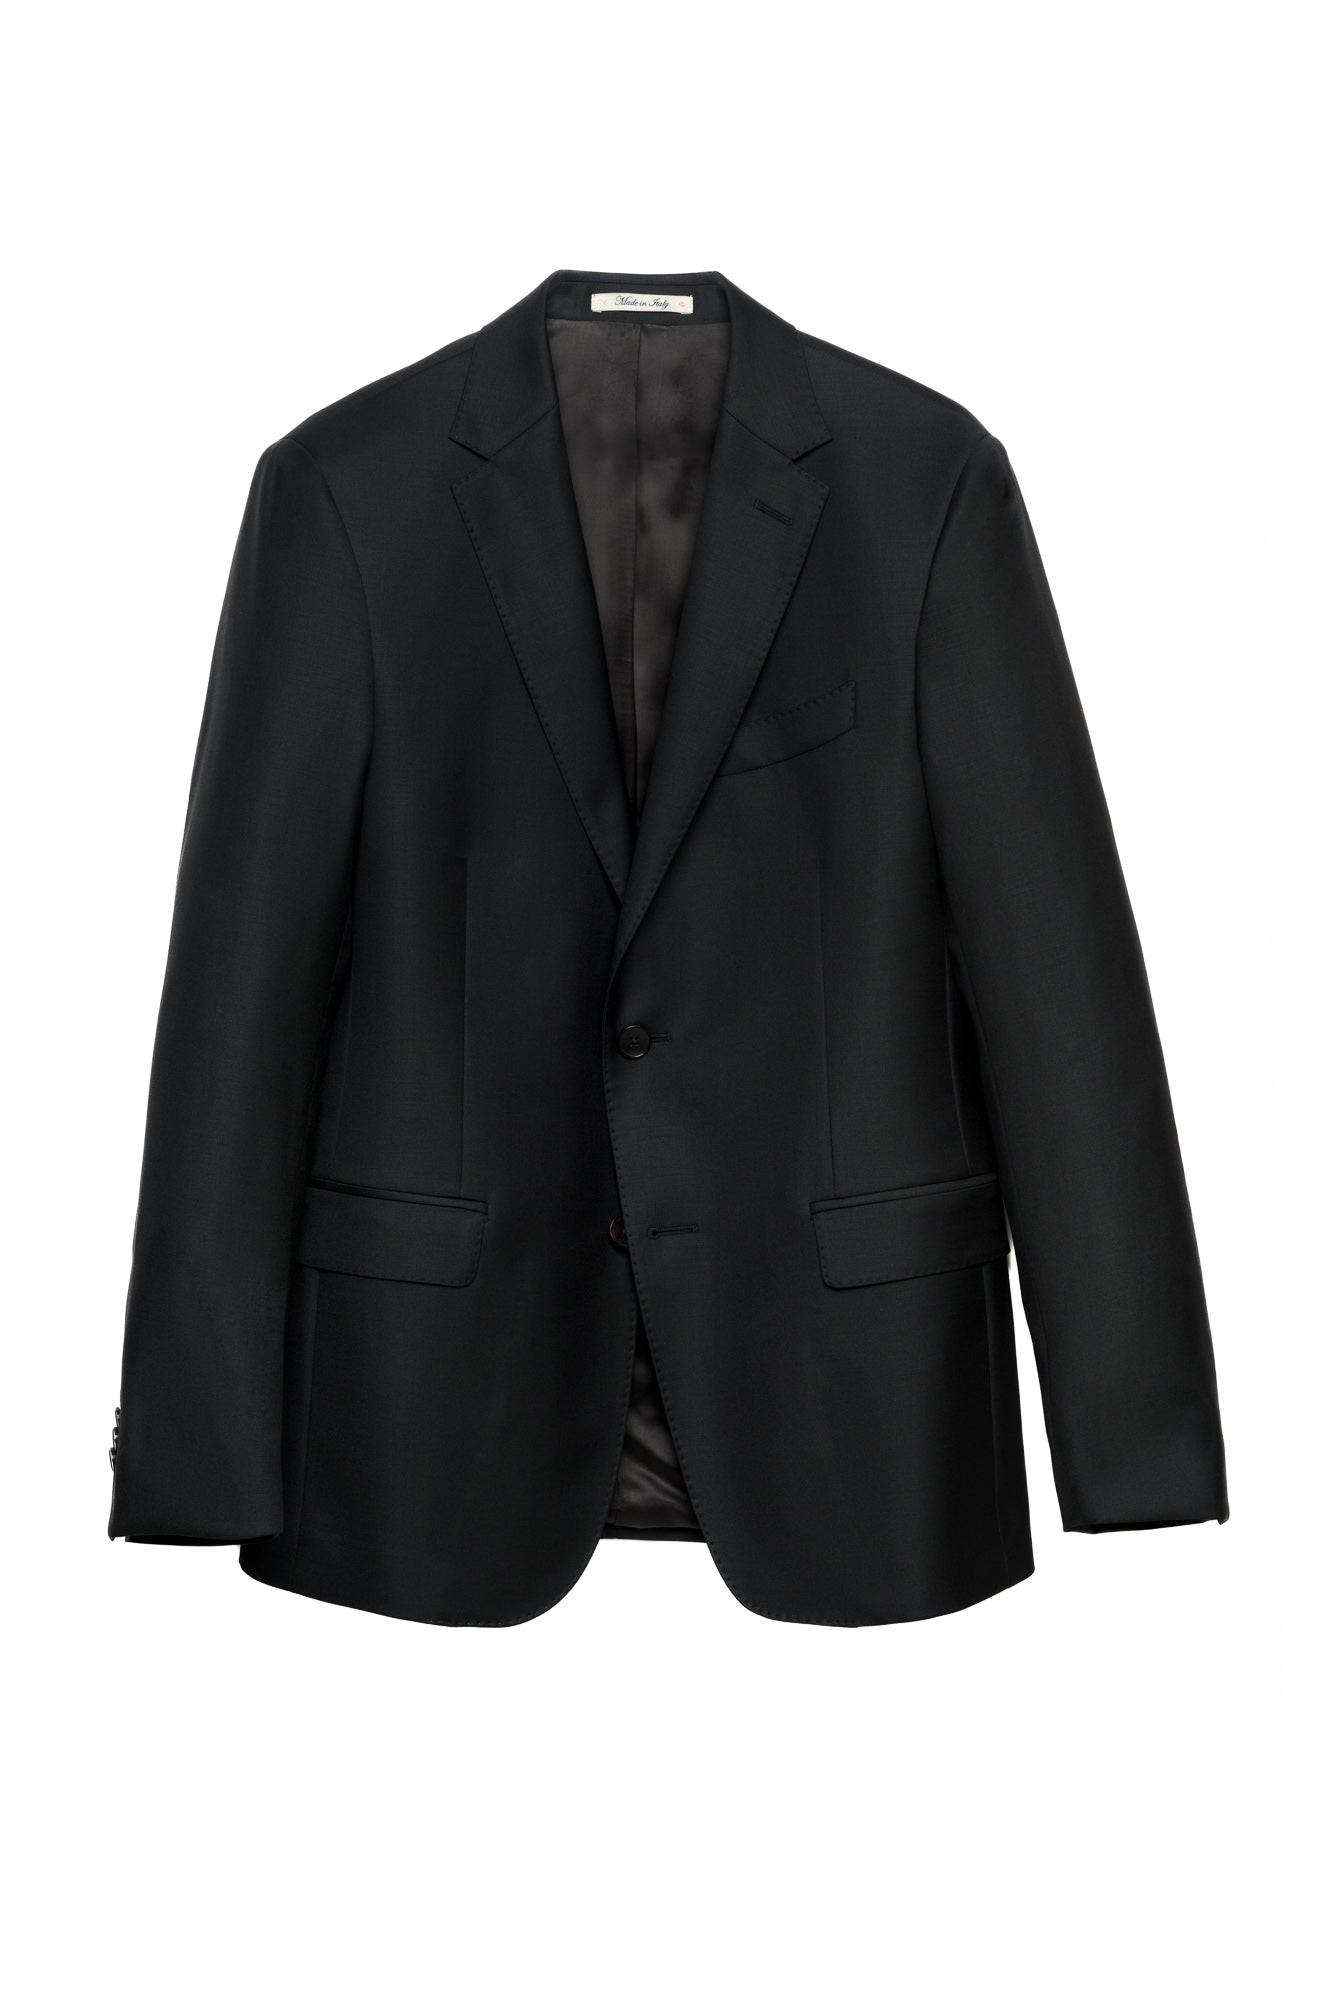 Black Suit Made in Wool from the Vitale Barberis Canonico Woollen Mill.